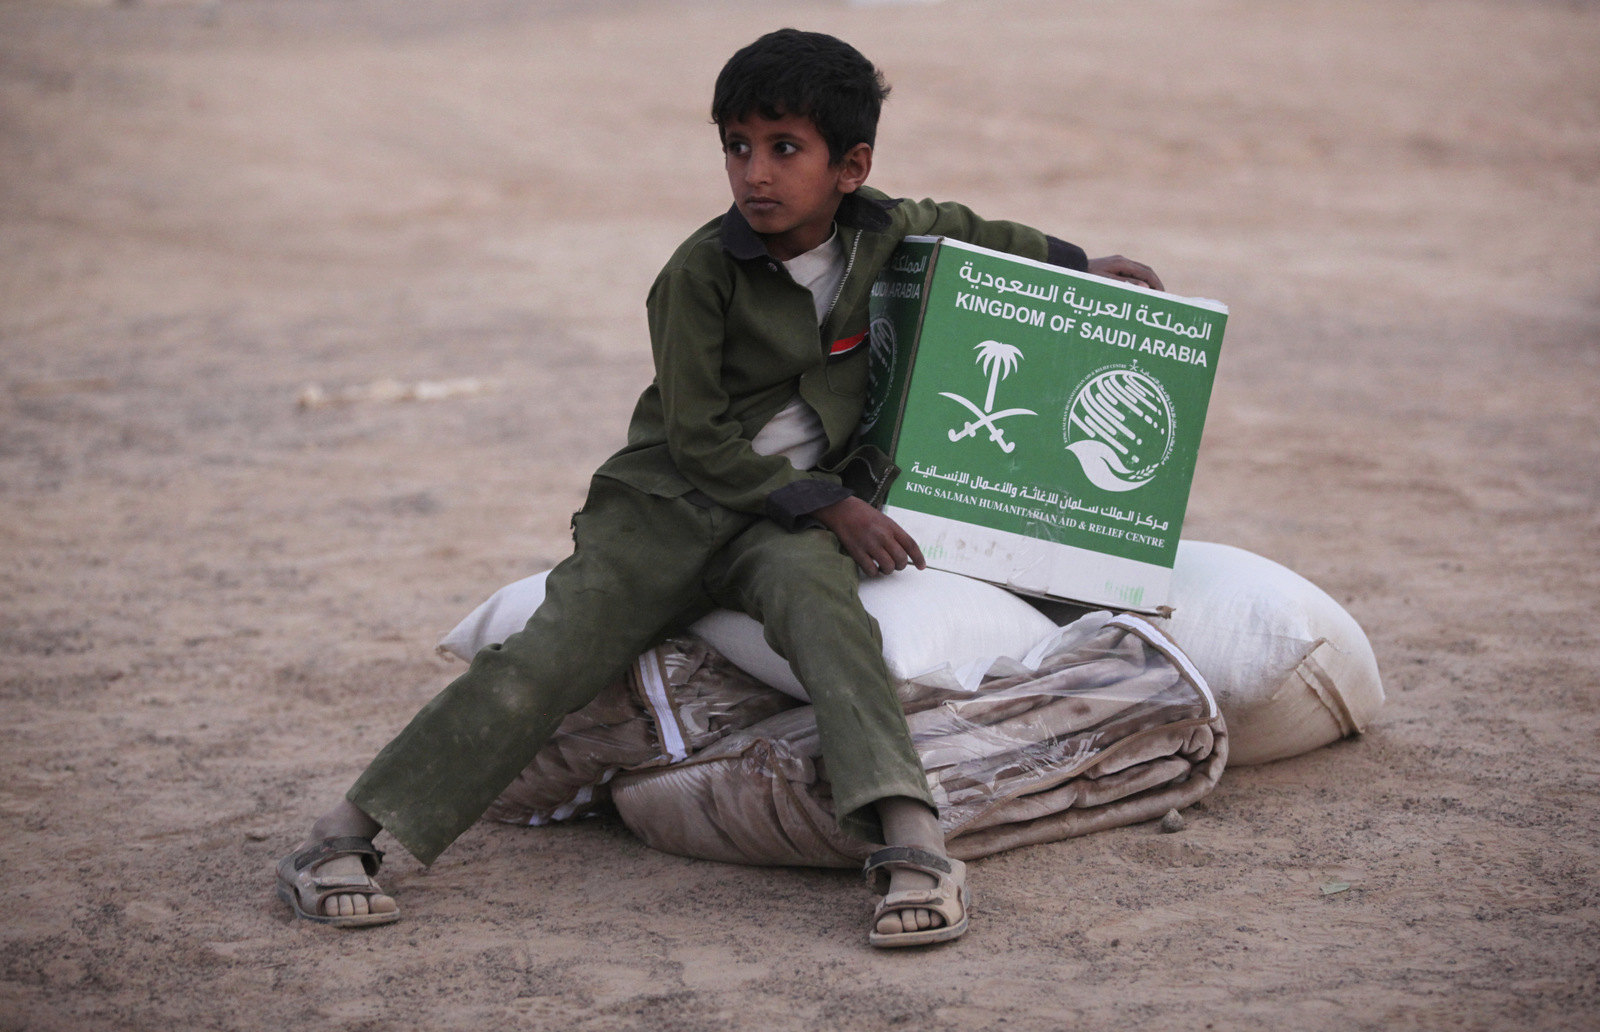 A young Yemeni boy living in a camp for people displaced by his country's war holds a box of aid from Saudi Arabia in Marib, Yemen, Feb. 1, 2018. (AP/Jon Gambrell)